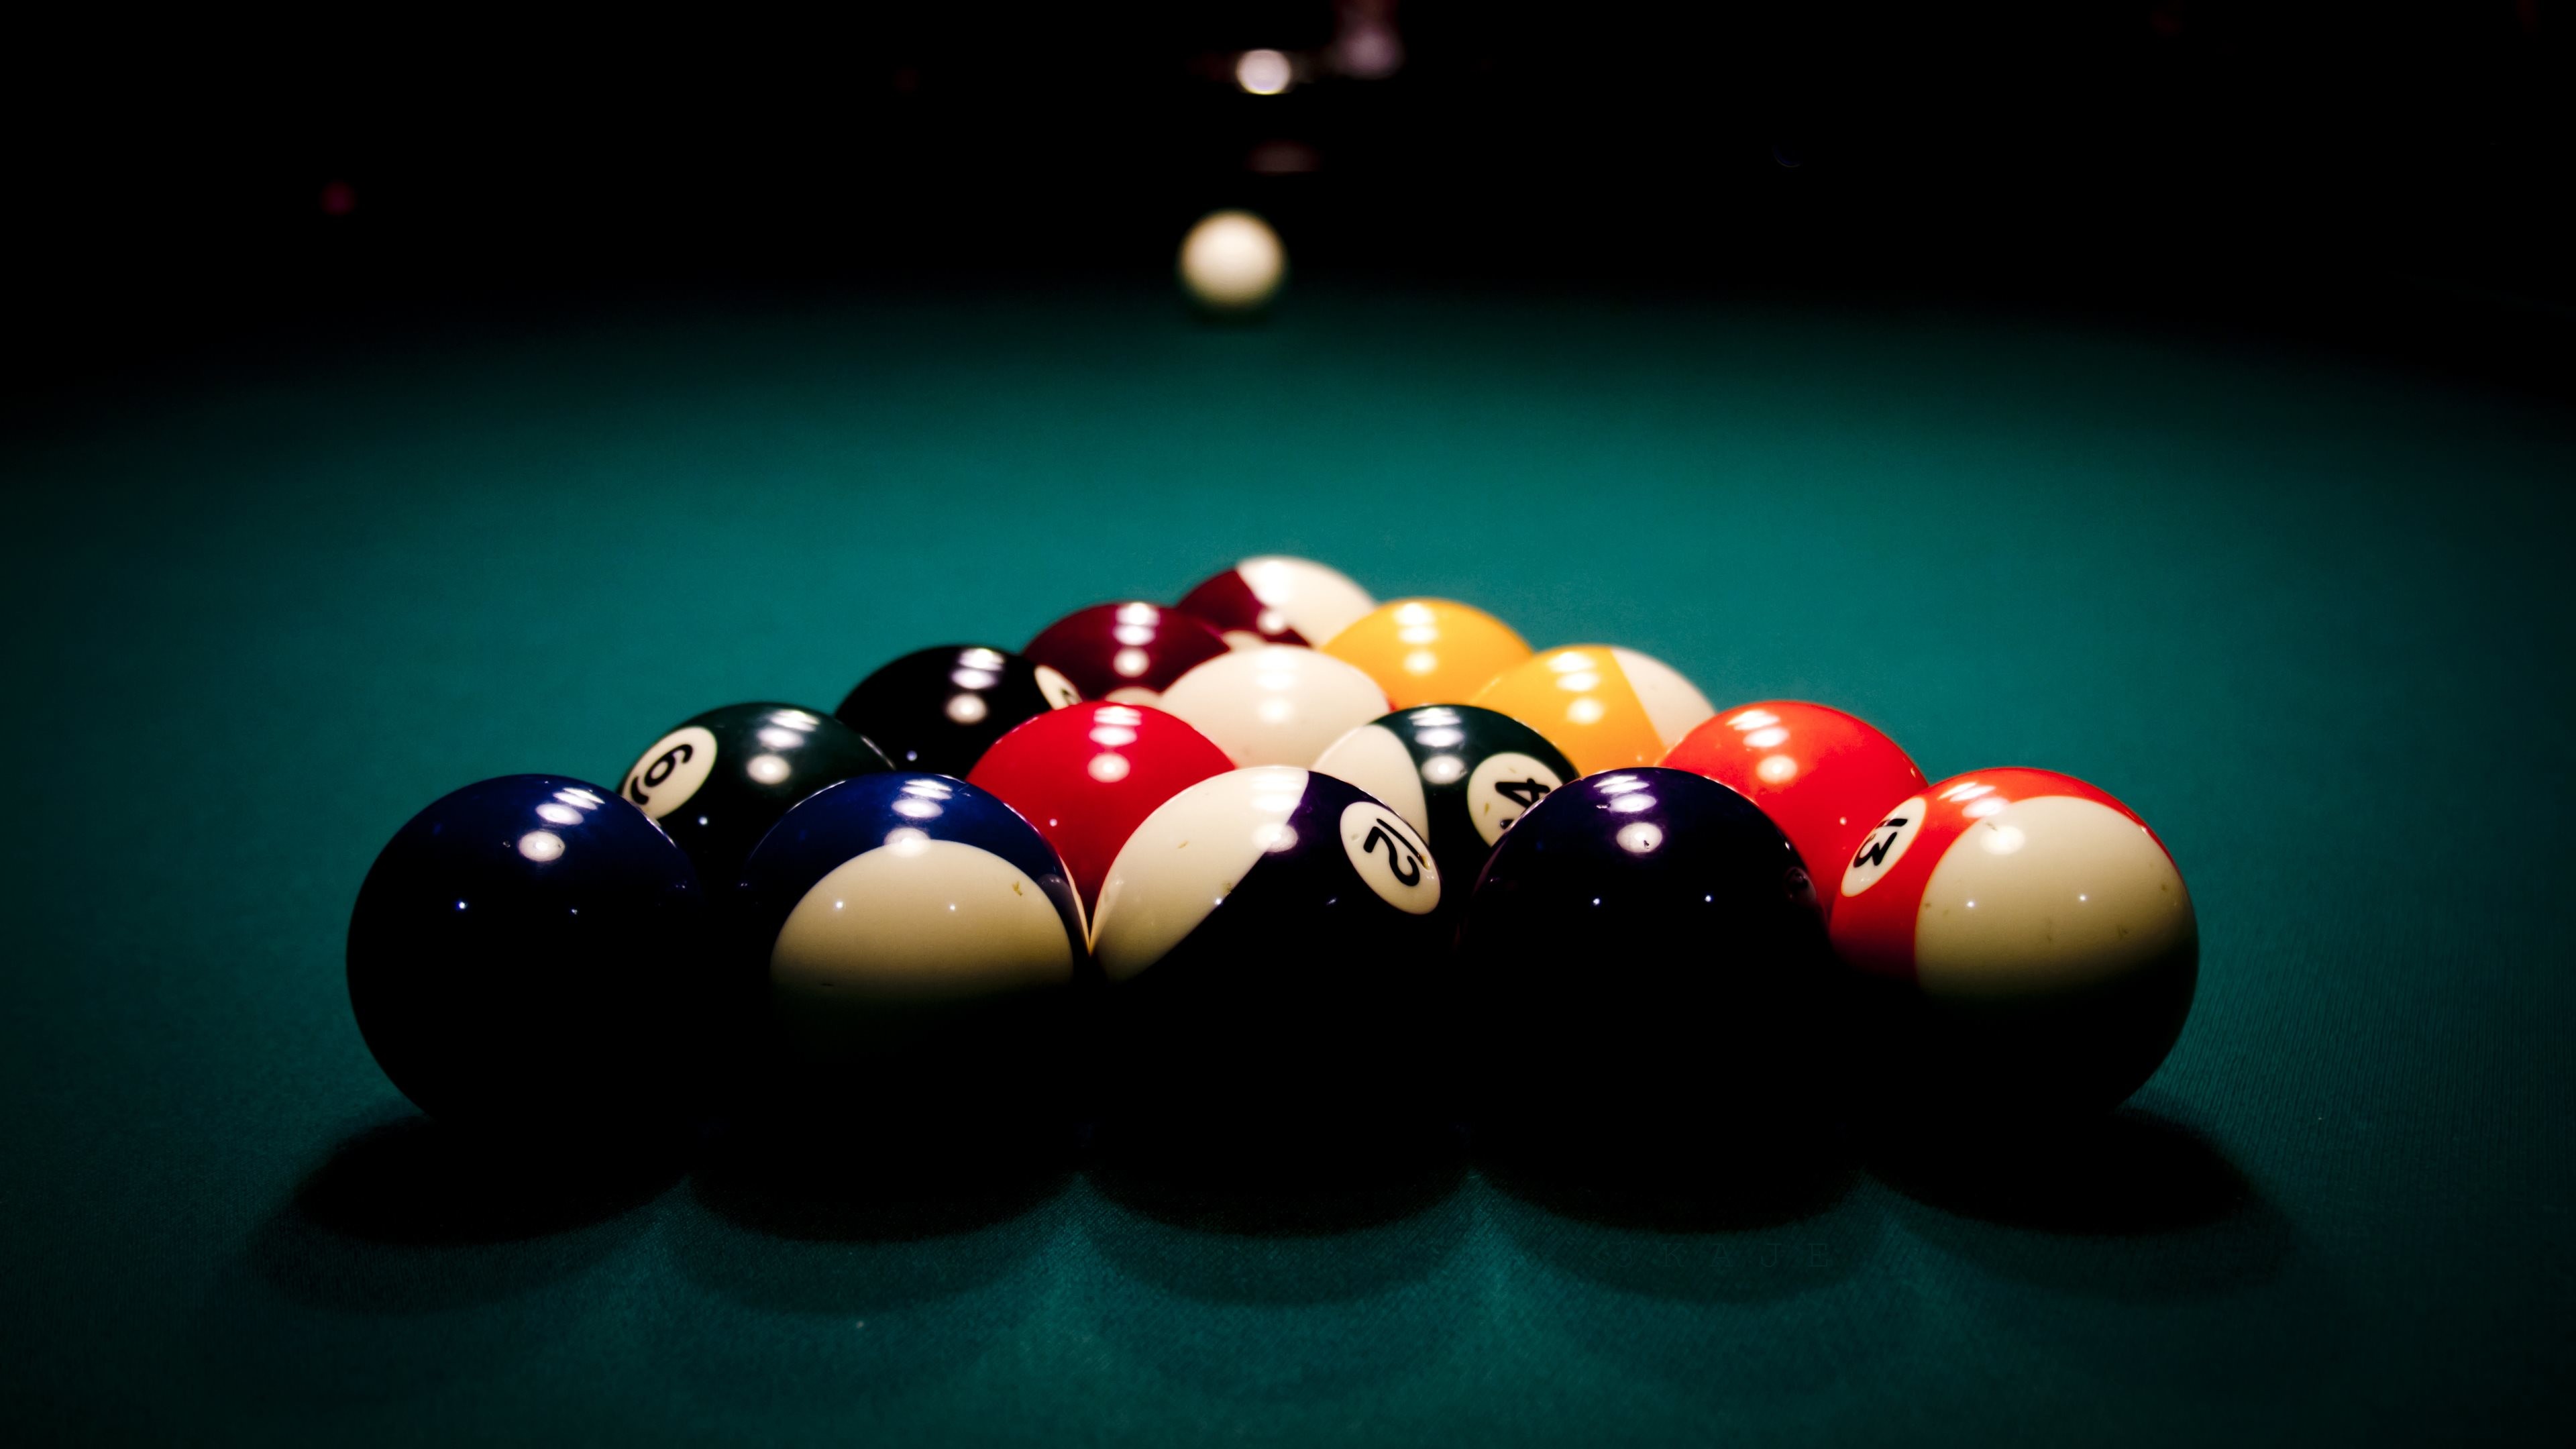 3840x2160 Tags:  Snooker